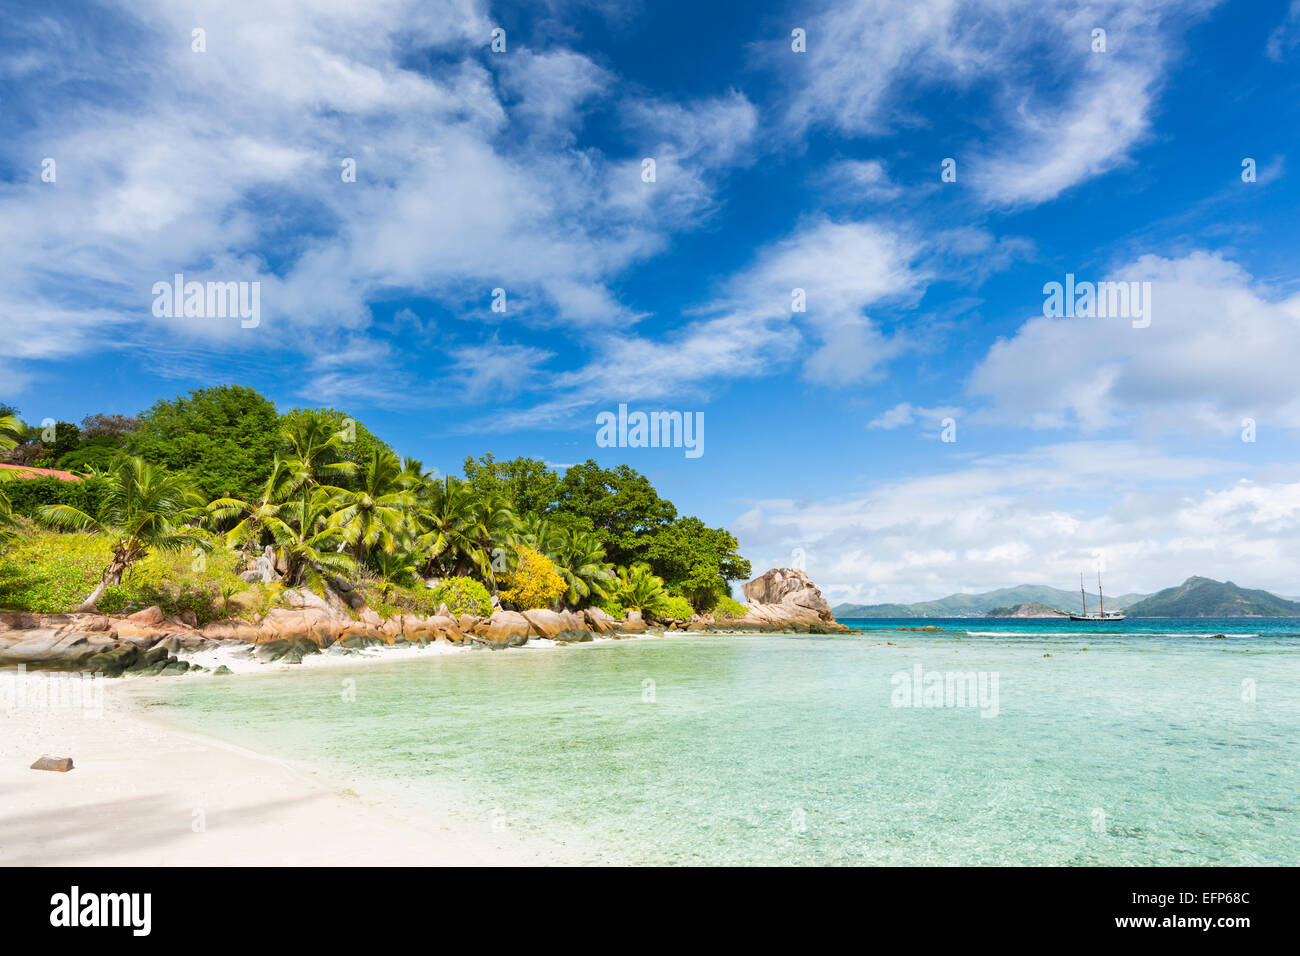 Calm water at Anse Severe in La Digue, Seychelles with palm trees and granite rocks in the background Stock Photo